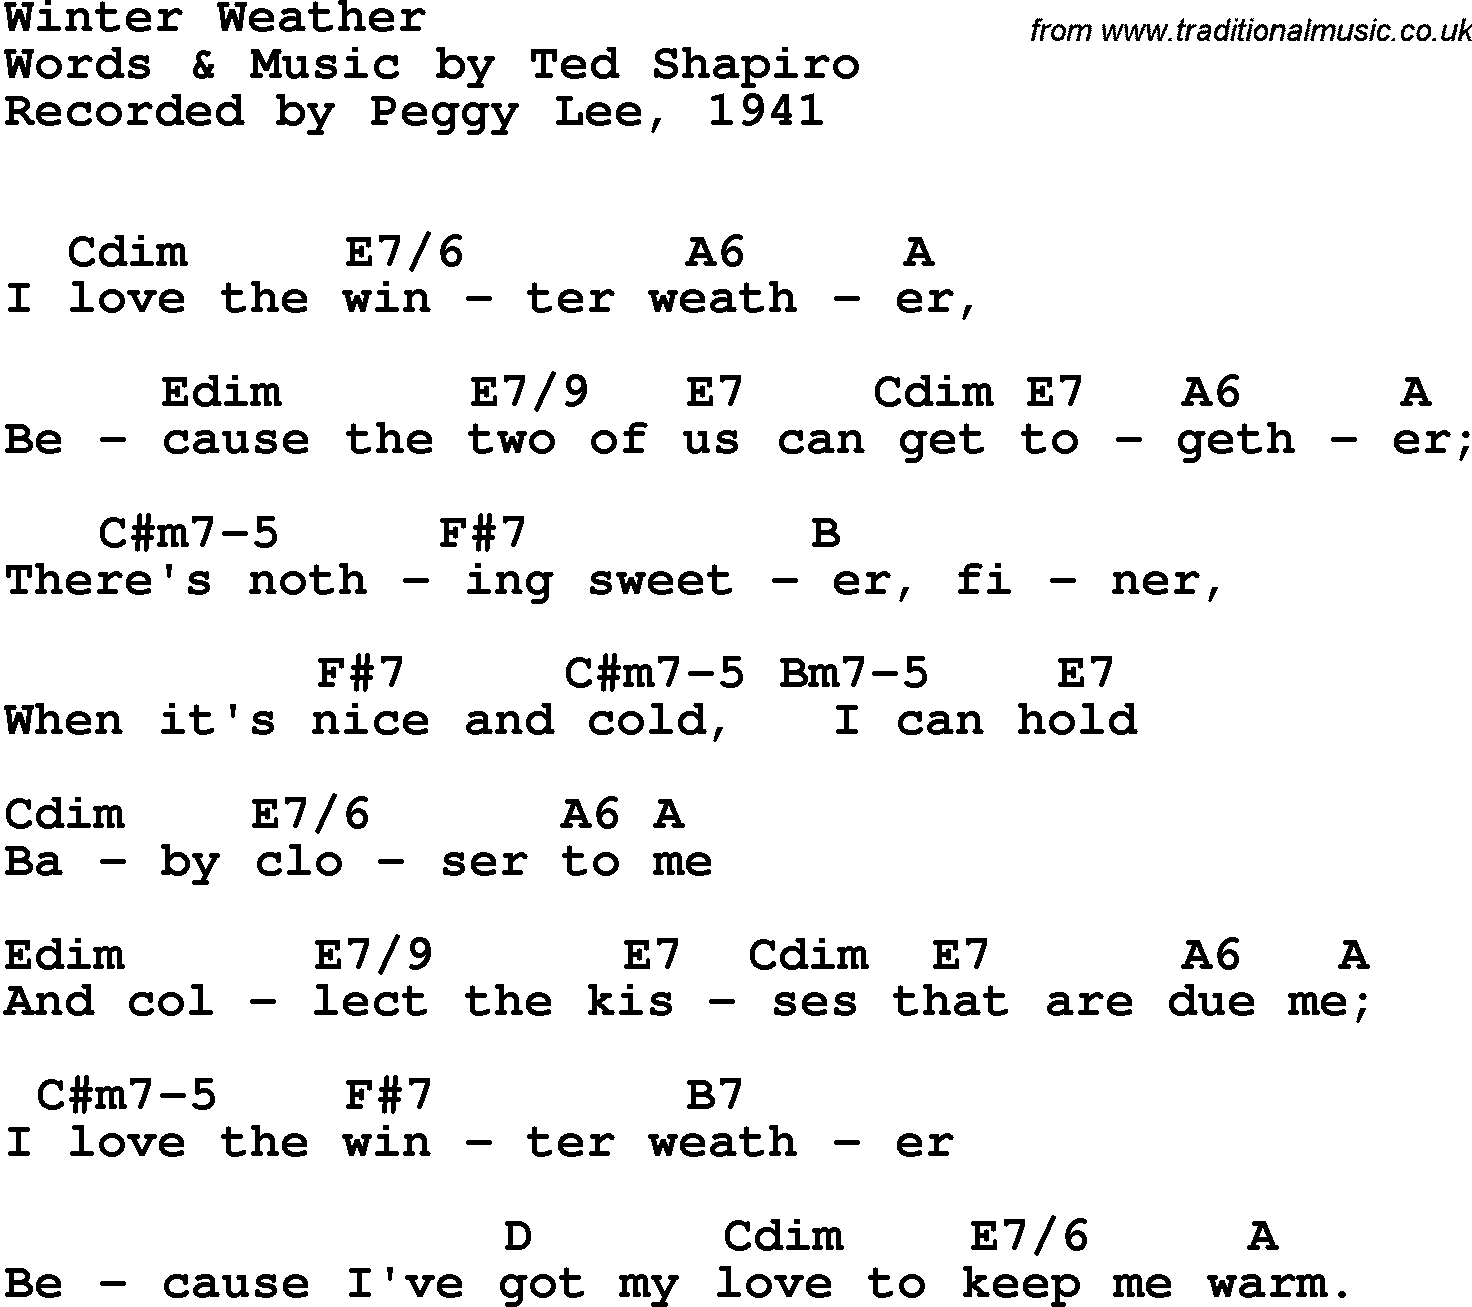 Song Lyrics with guitar chords for Winter Weather - Peggy Lee, 1941